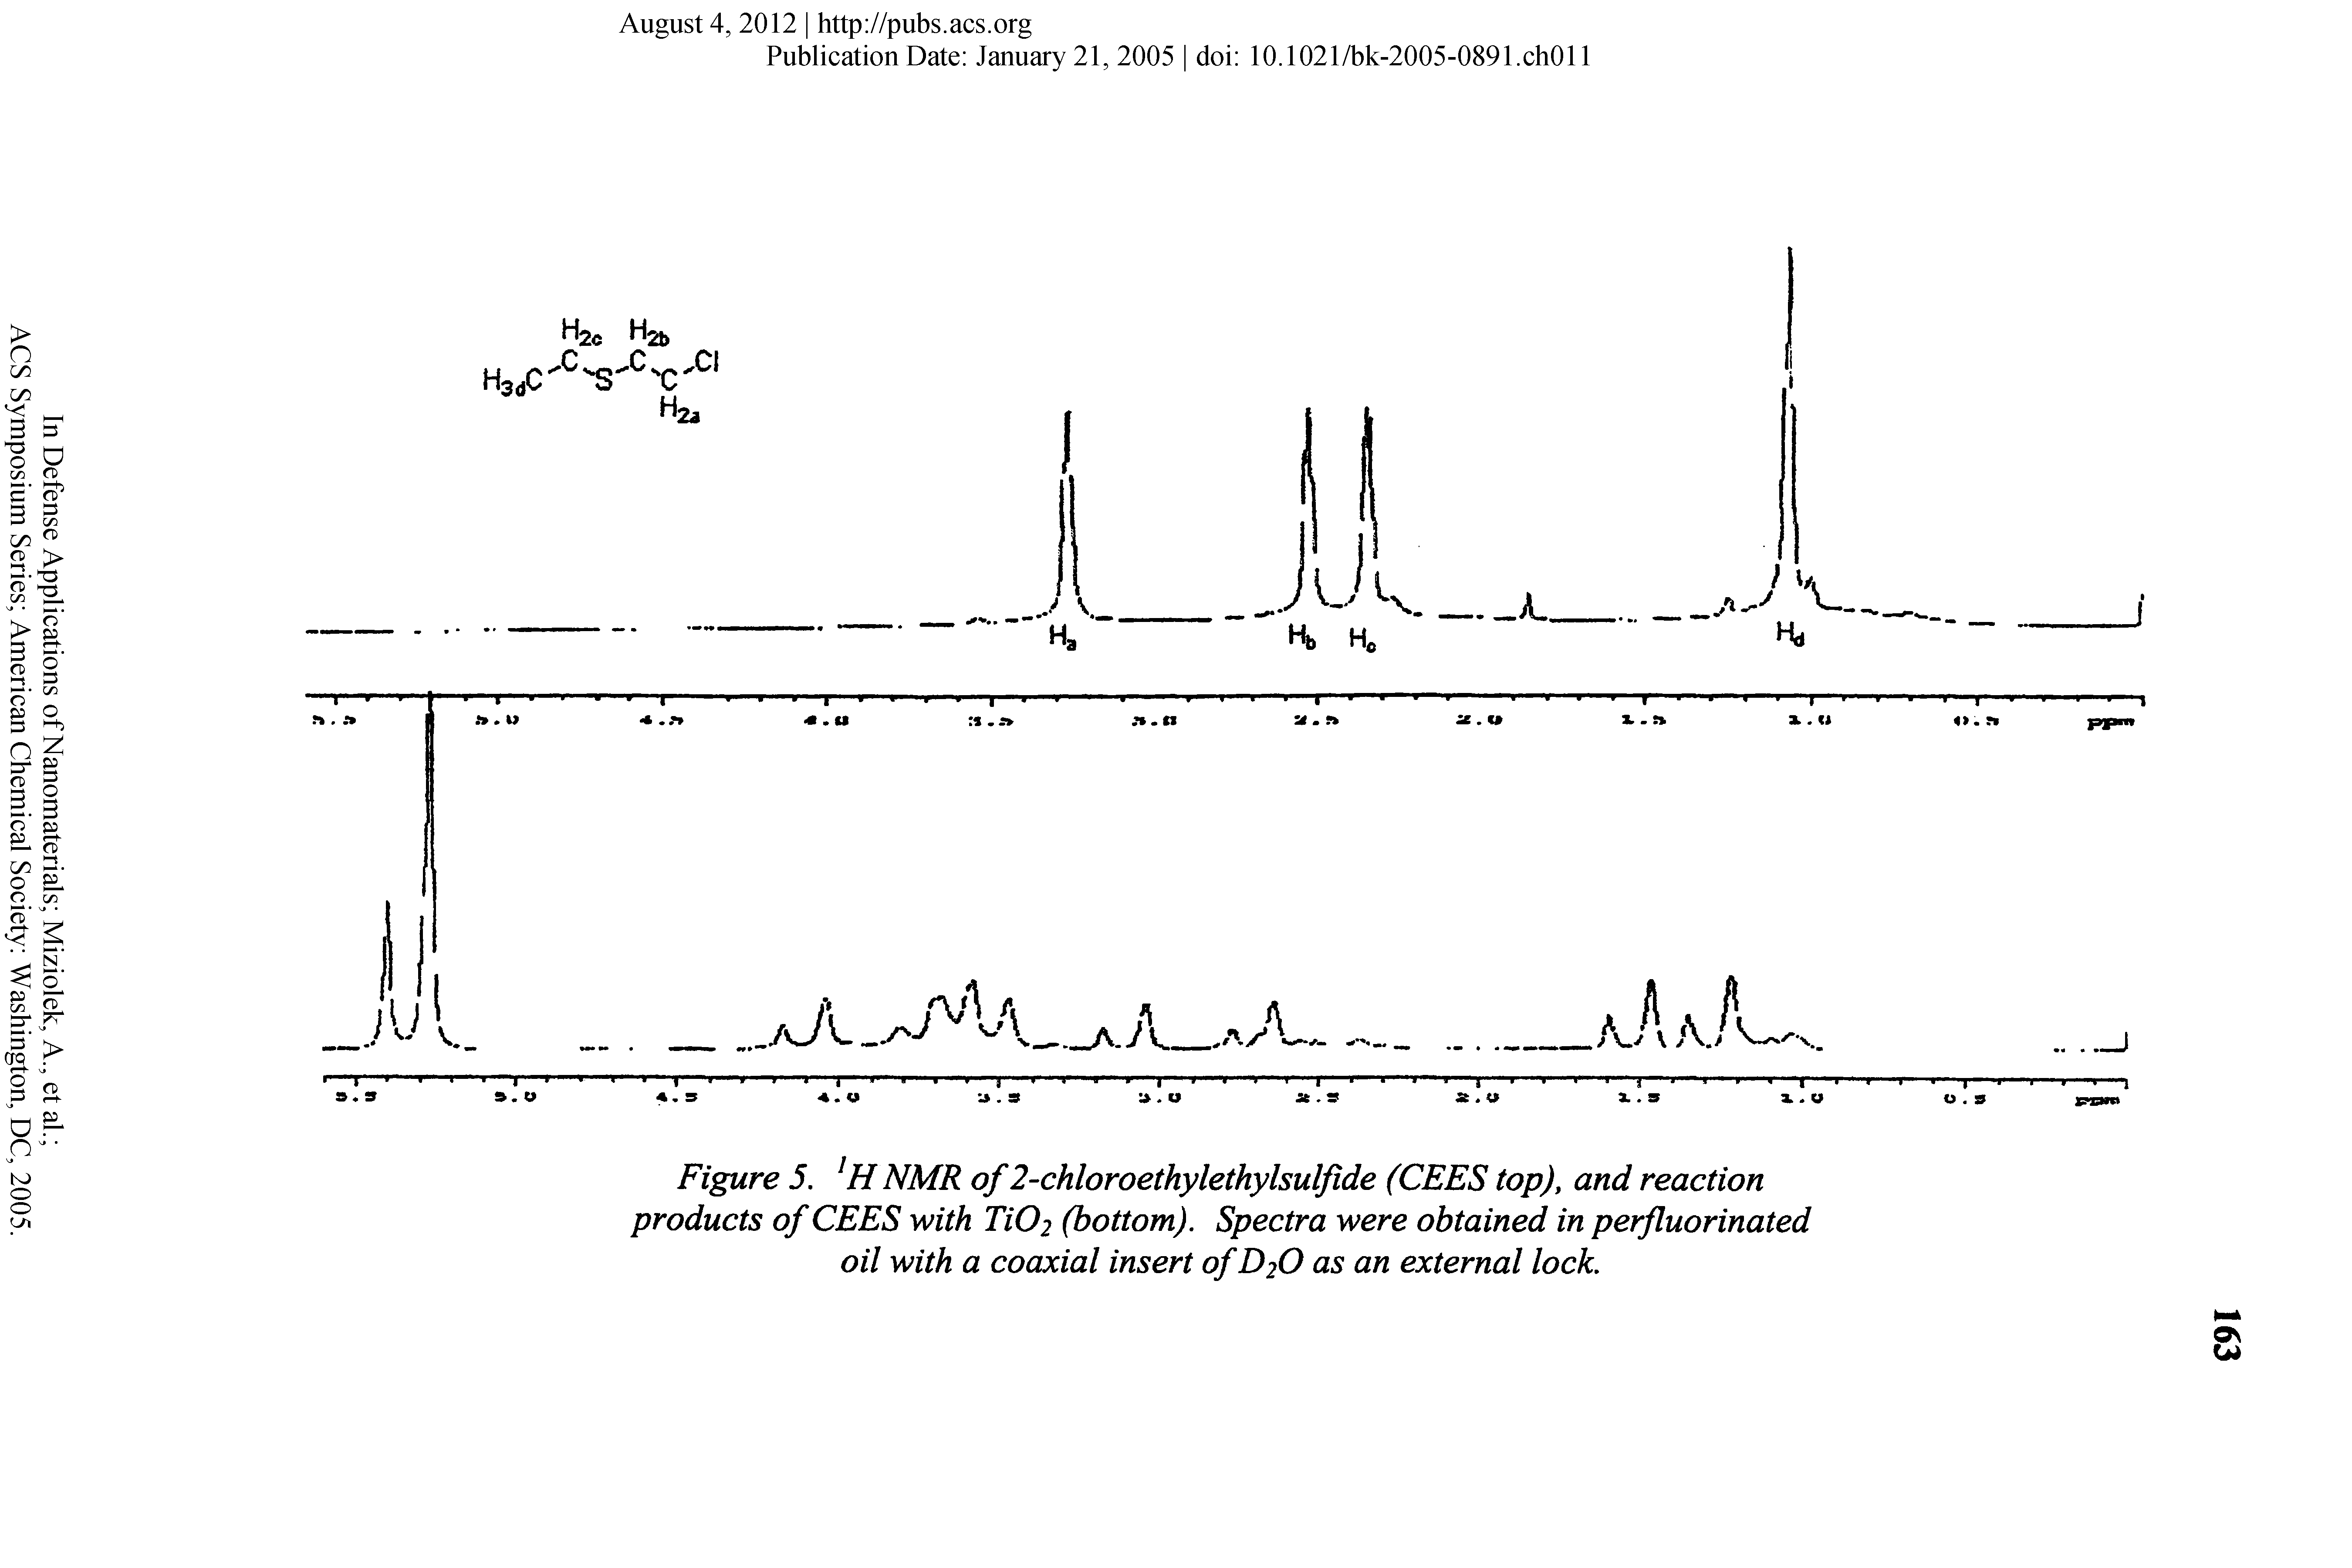 Figure 5. HNMR of 2-chloroethylethylsulfide (CEES top), and reaction products of CEES with Ti02 (bottom). Spectra were obtained in perfluorinated oil with a coaxial insert of D2O as an external lock.